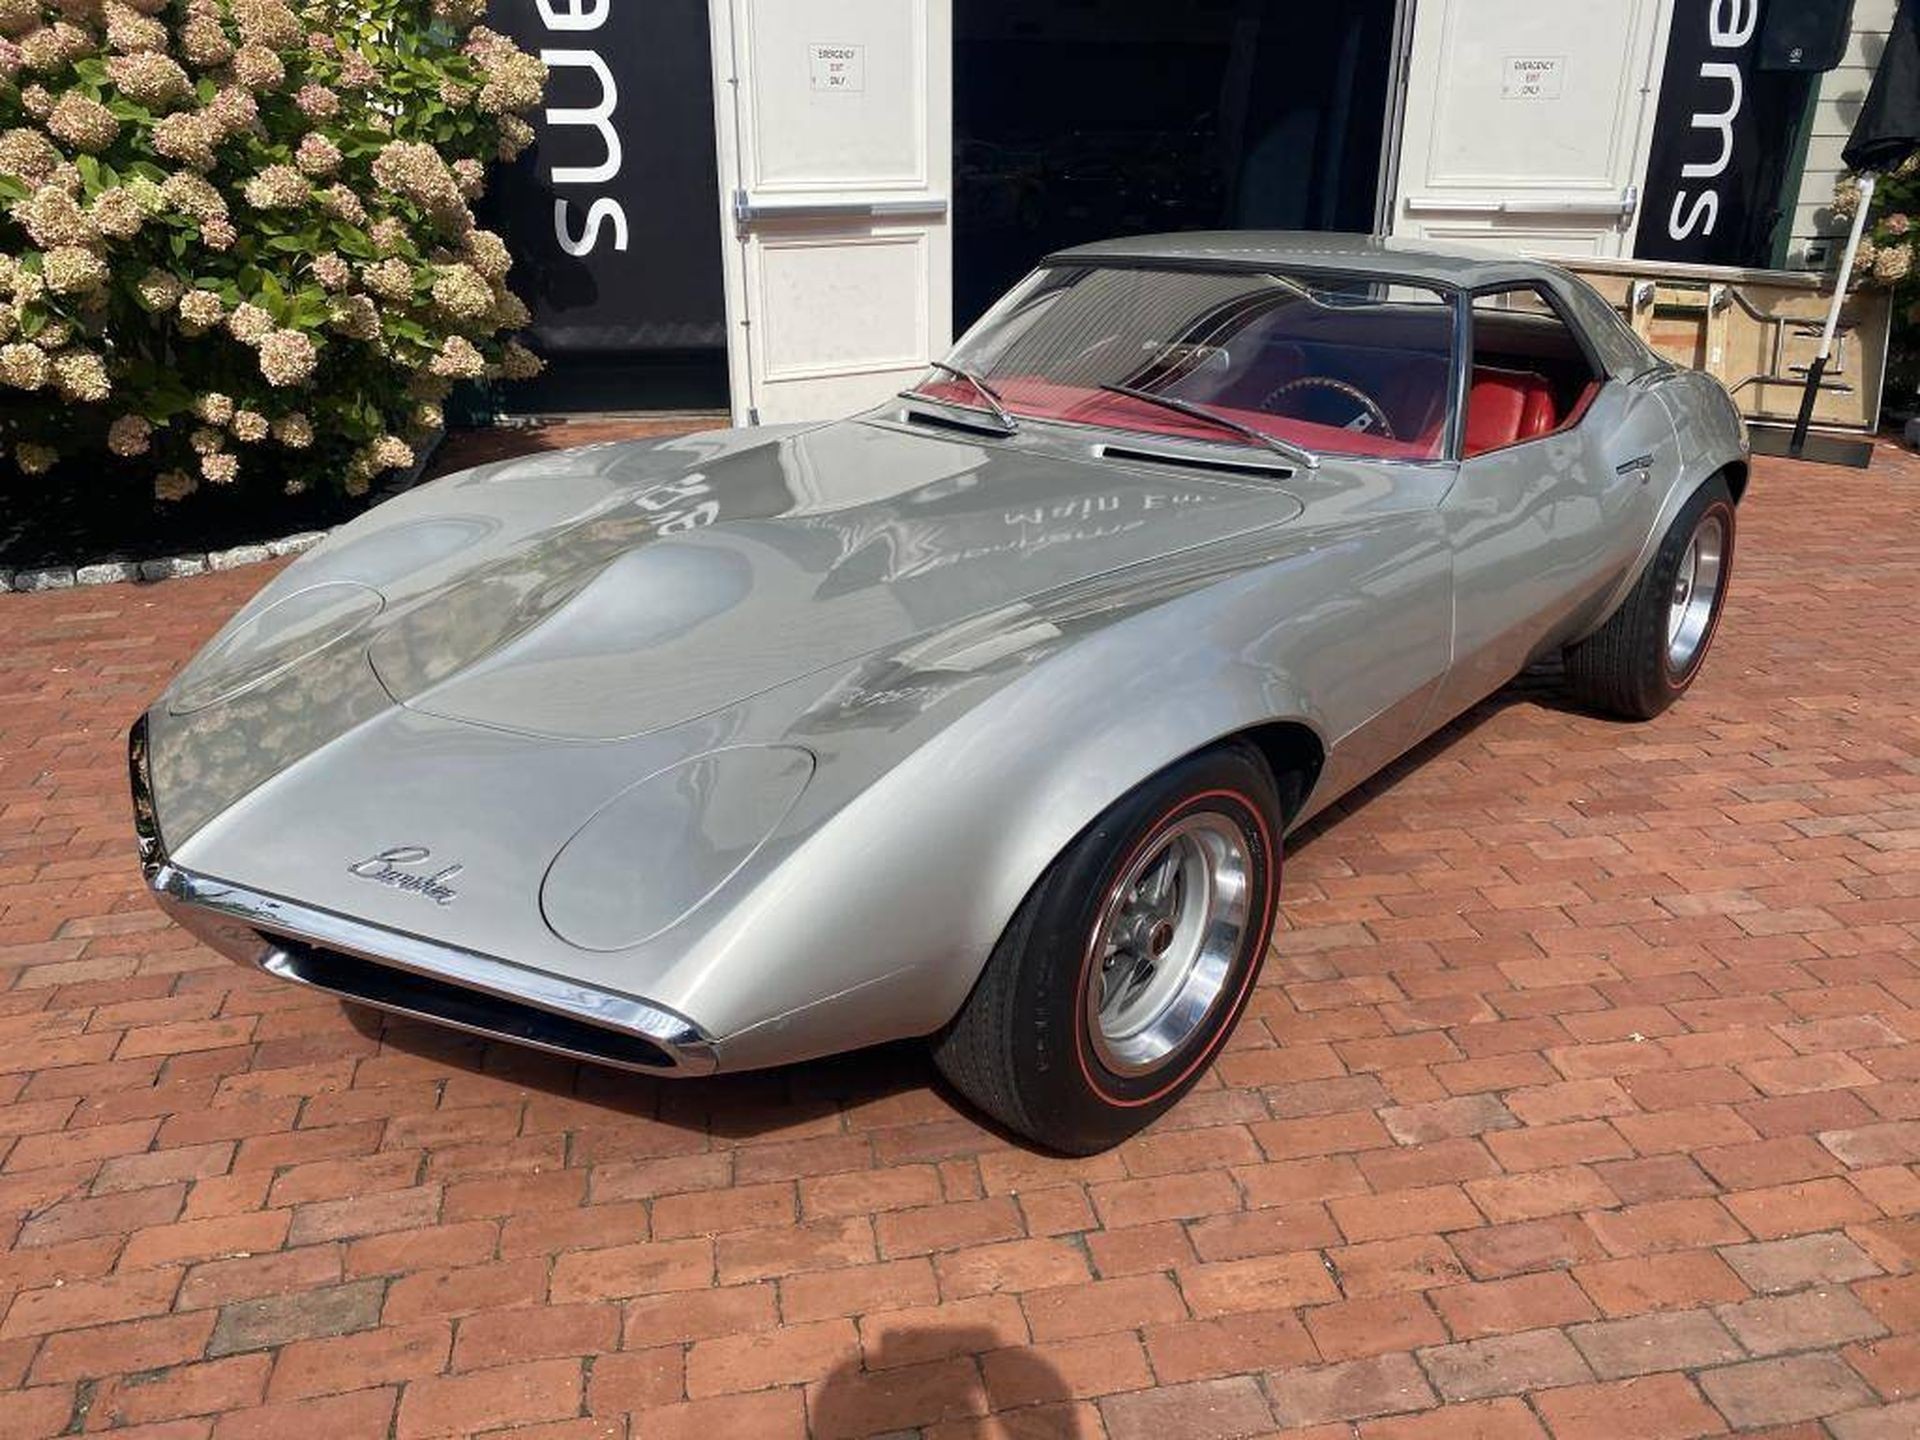 One-Off 1964 Pontiac Banshee XP-833 Prototype, the Corvette's Worst Nightmare, is For Sale